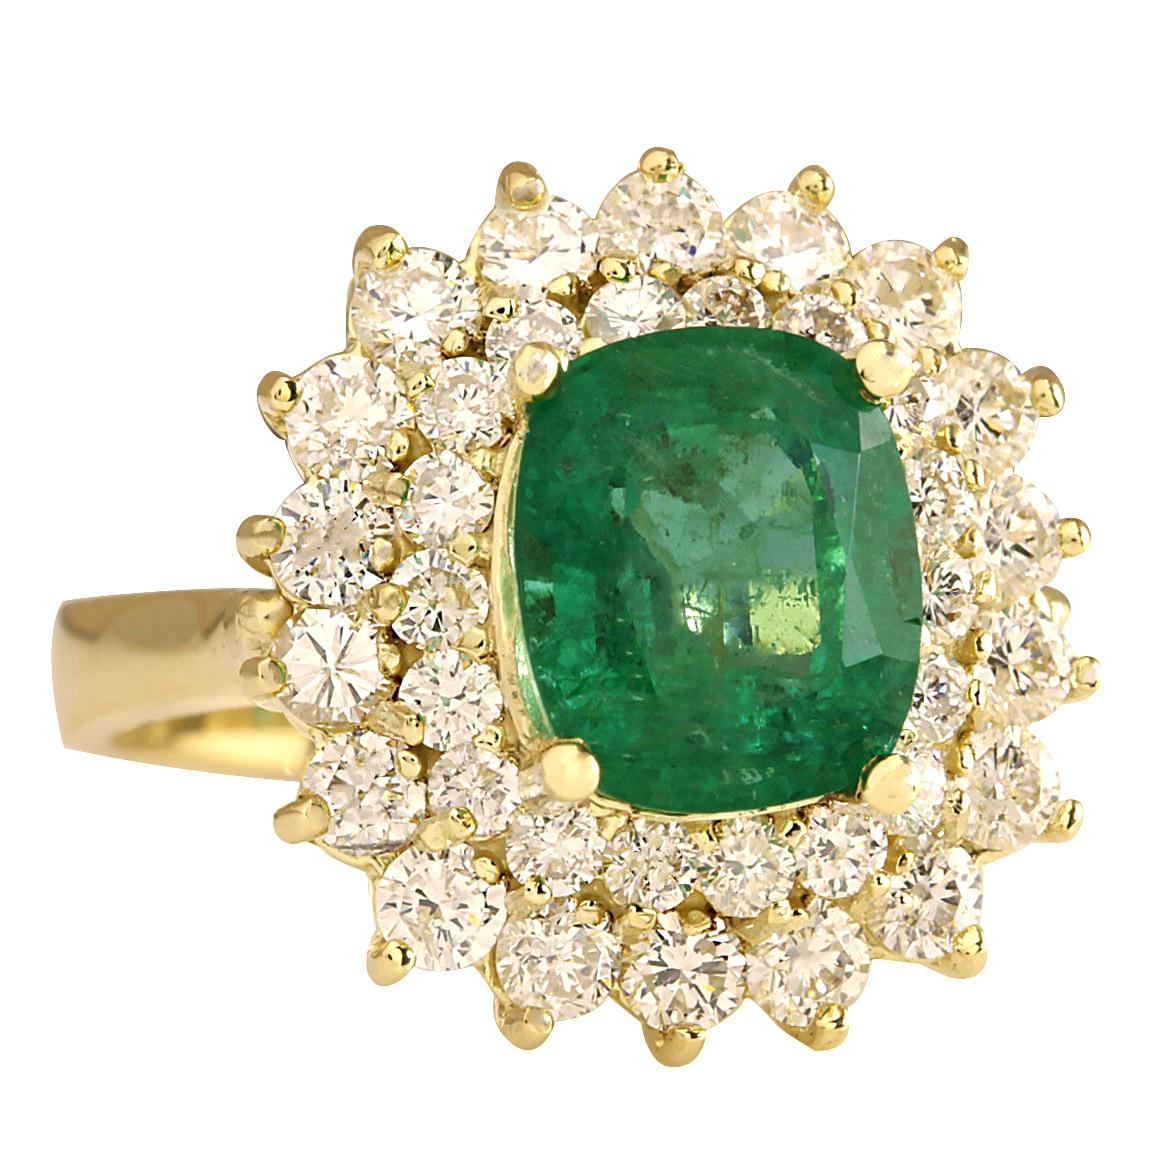 Stamped: 14K Yellow Gold
Total Ring Weight: 8.5 Grams
Total Natural Emerald Weight is 2.79 Carat (Measures: 9.00x7.00 mm)
Color: Green
Total Natural Diamond Weight is 1.60 Carat
Color: F-G, Clarity: VS2-SI1
Face Measures: 17.90x17.00 mm
Sku: